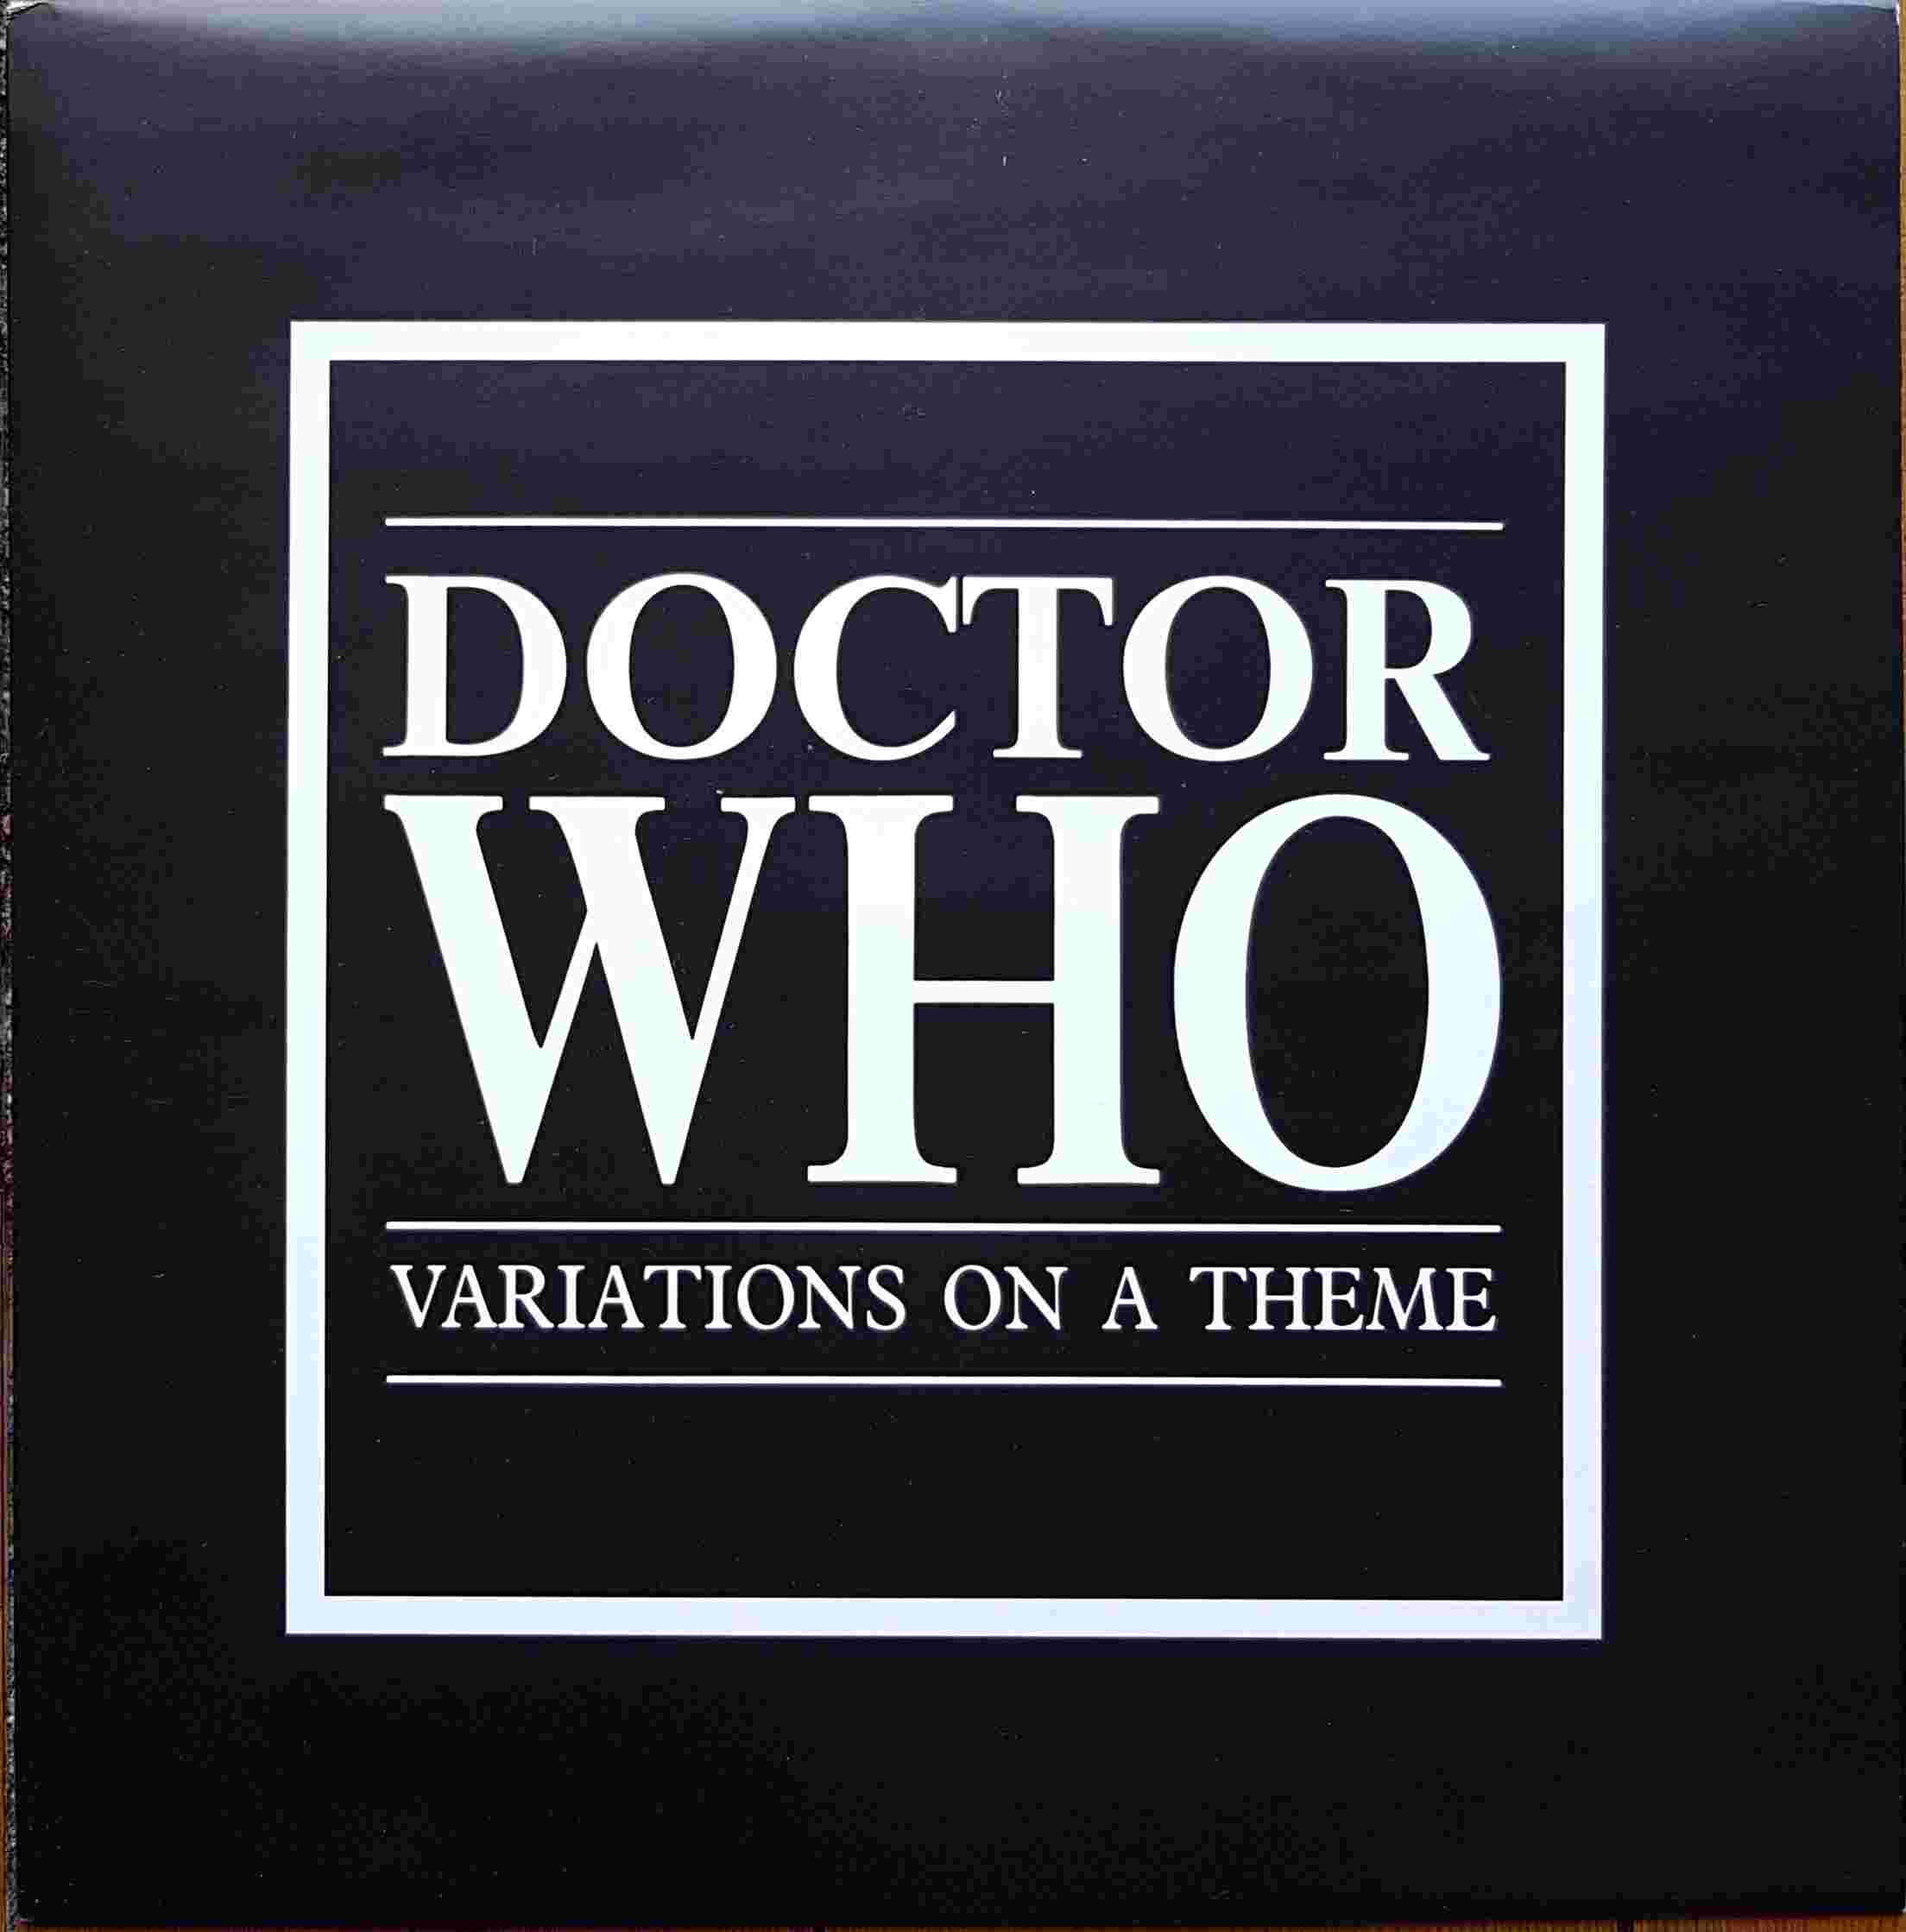 Picture of Doctor Who - Variations on a theme by artist Ron Grainer from the BBC 12inches - Records and Tapes library